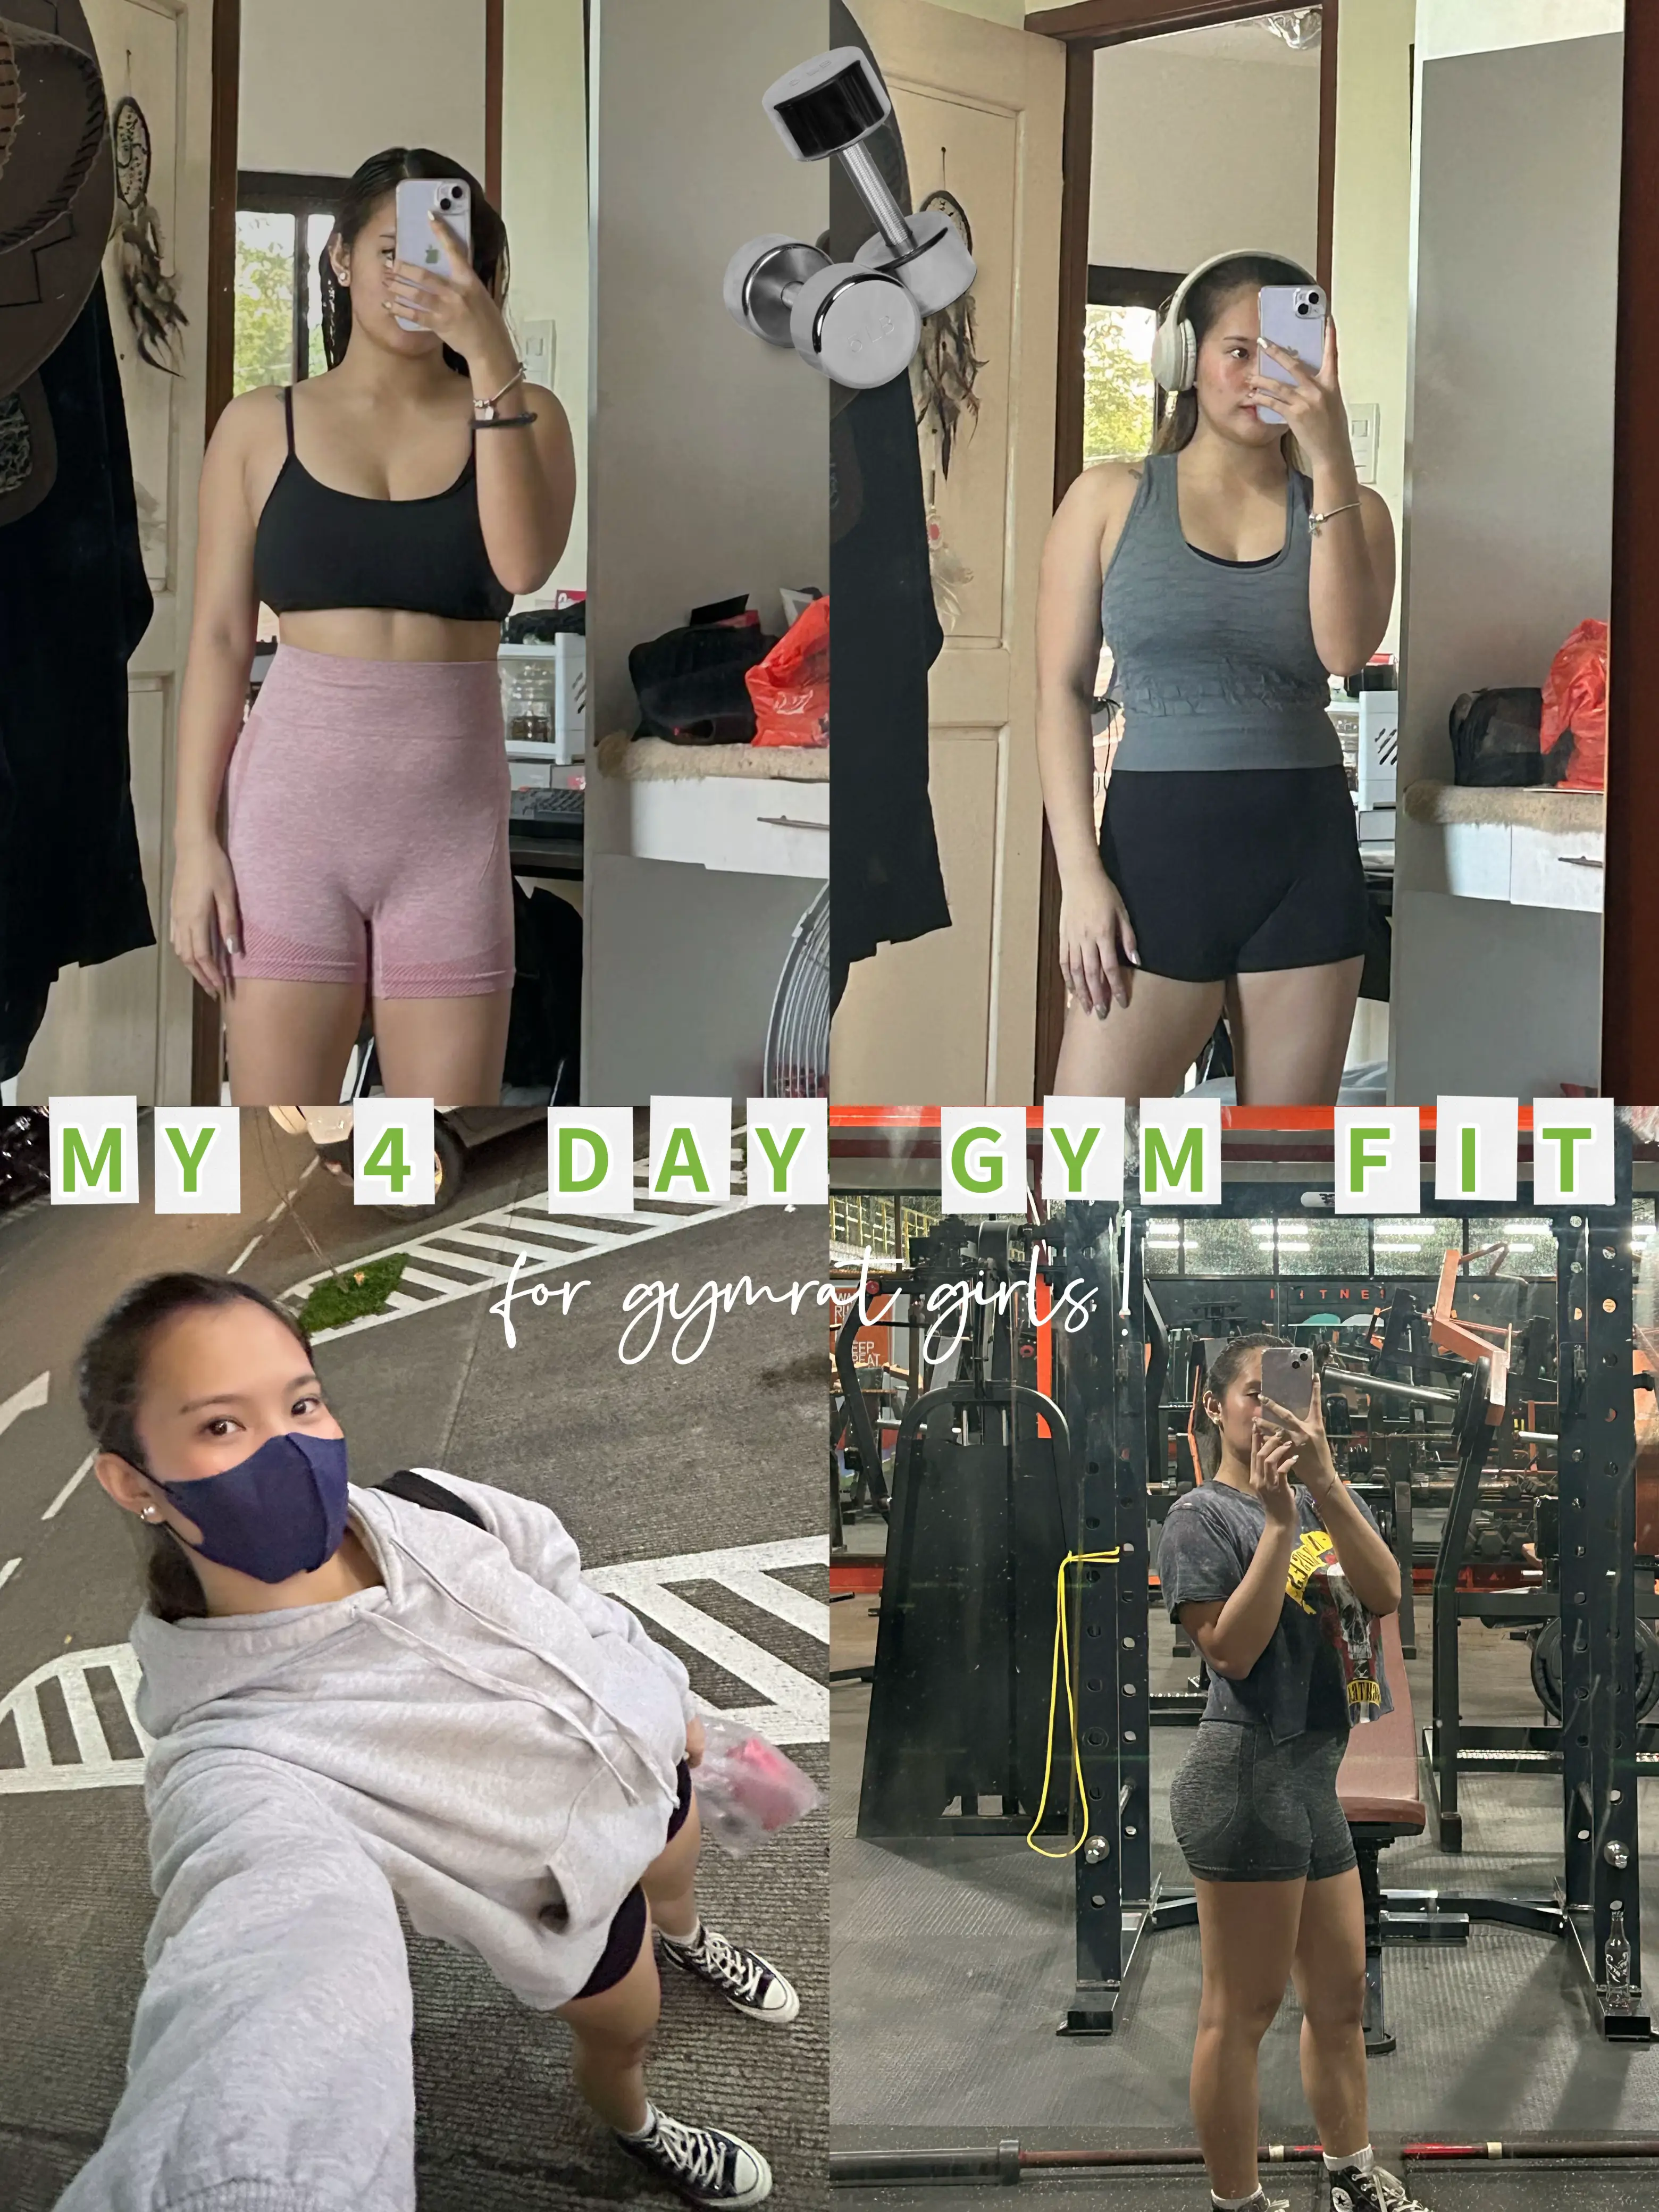 MY 4 DAY GYM FIT 🏋🏻, Gallery posted by Mhica Trilles 🦋